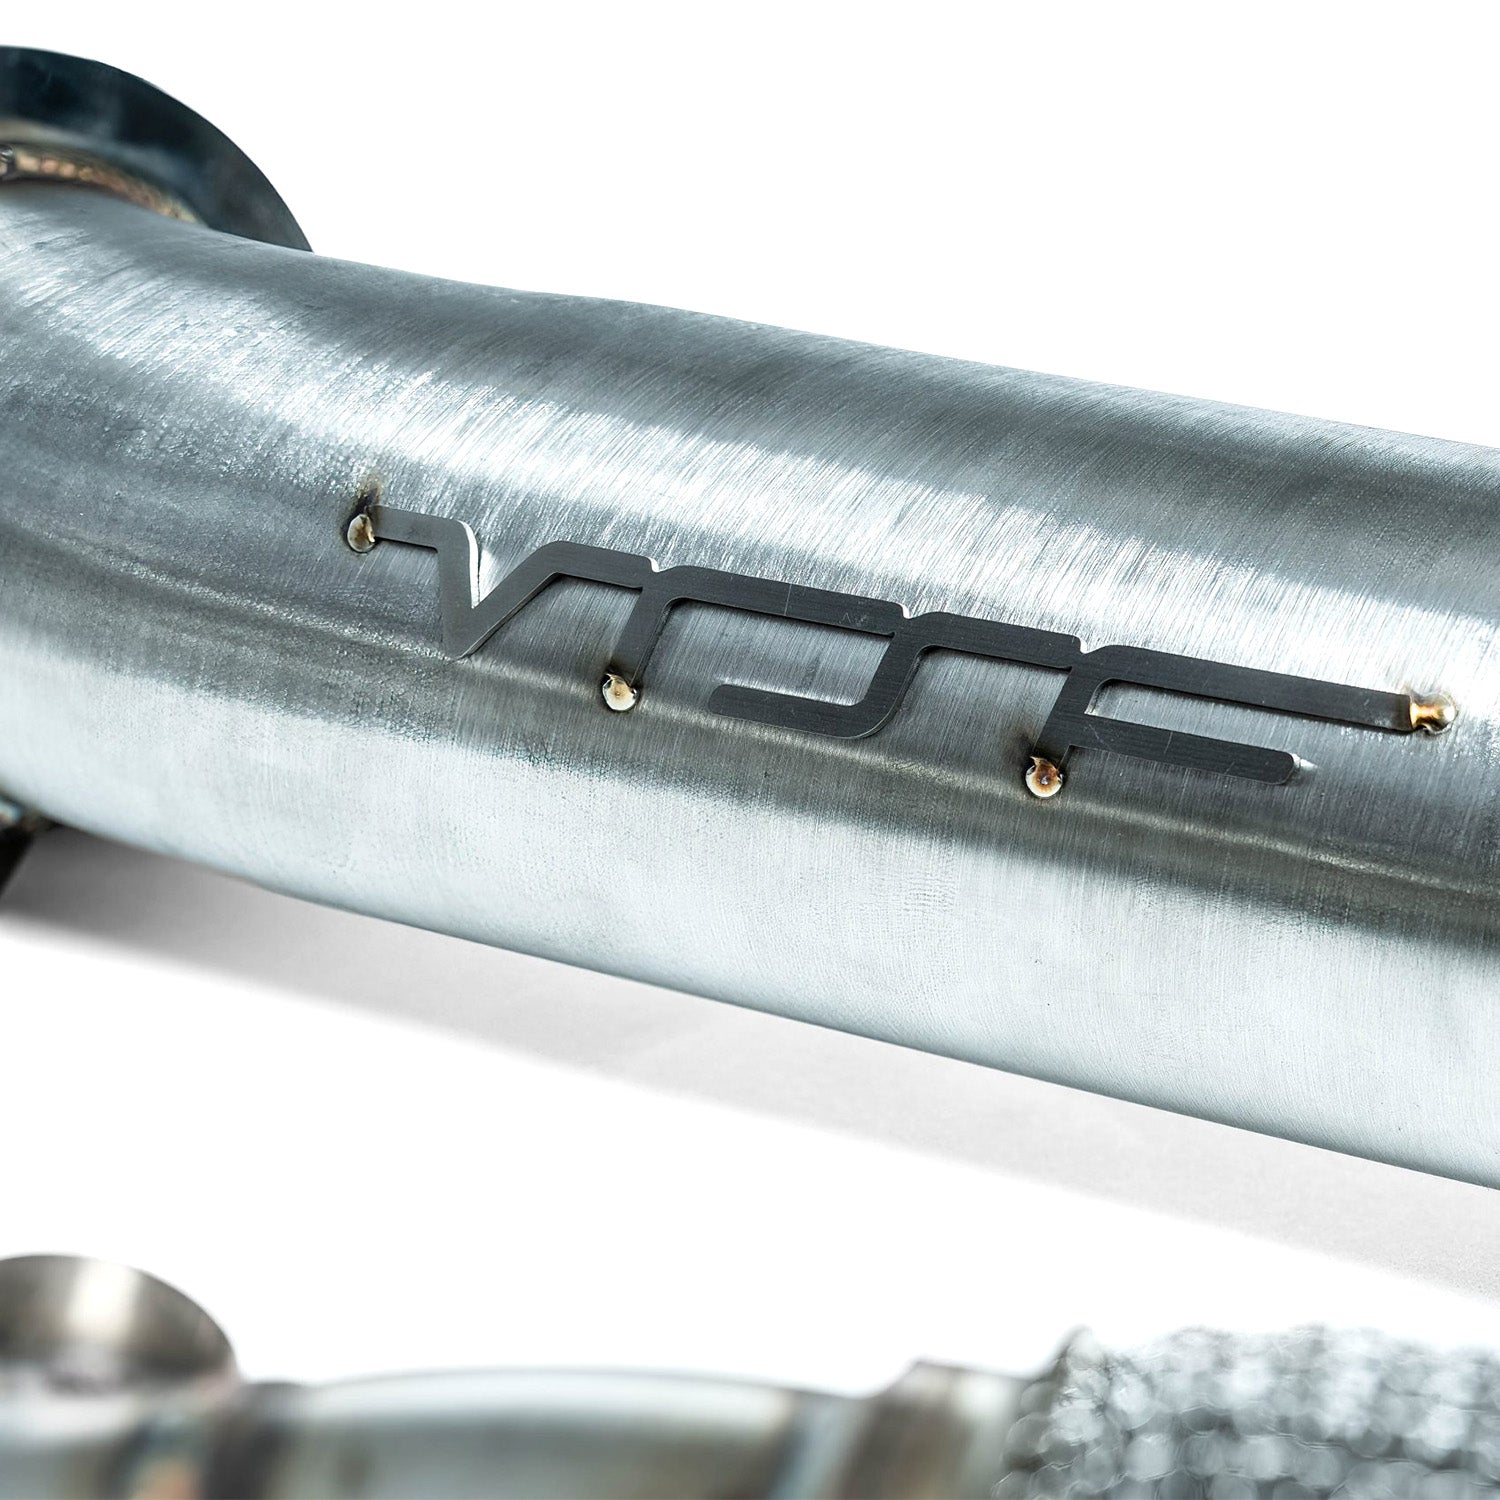 VRSF BMW S58 3" Racing Downpipes For 2021+ G80 M3, G82 M4